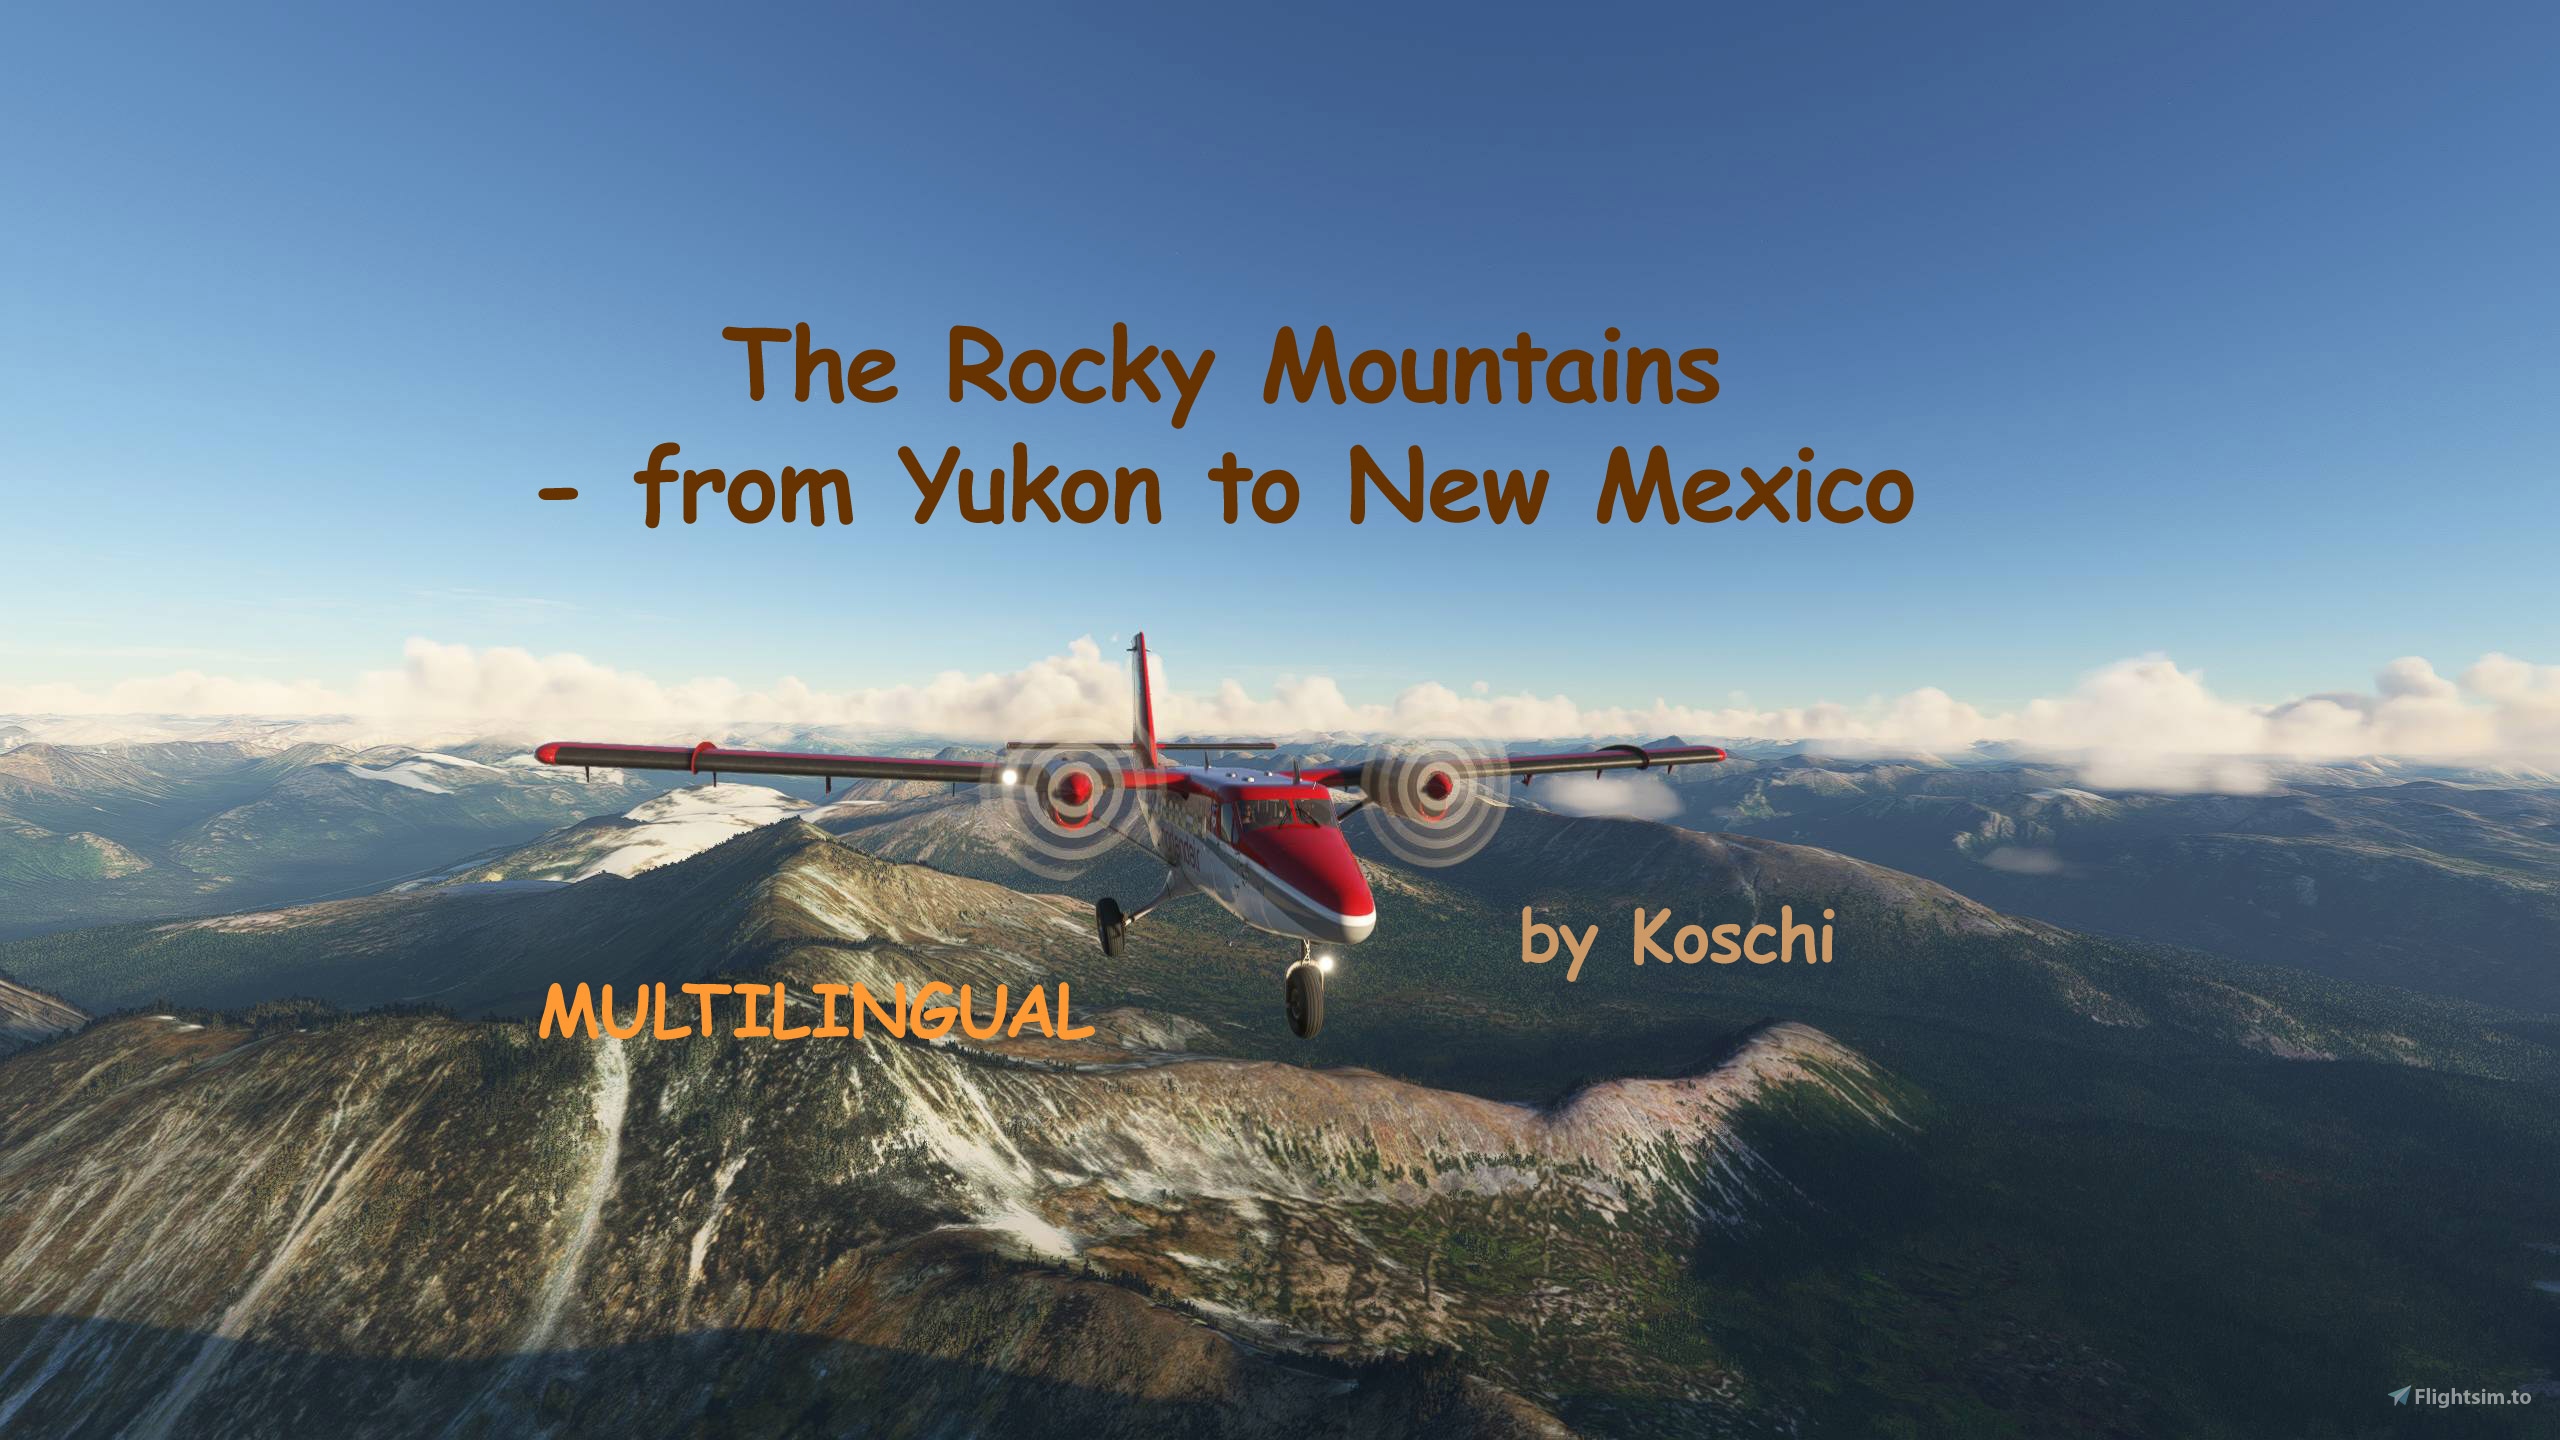 The Rocky Mountains - from Yukon to New Mexico